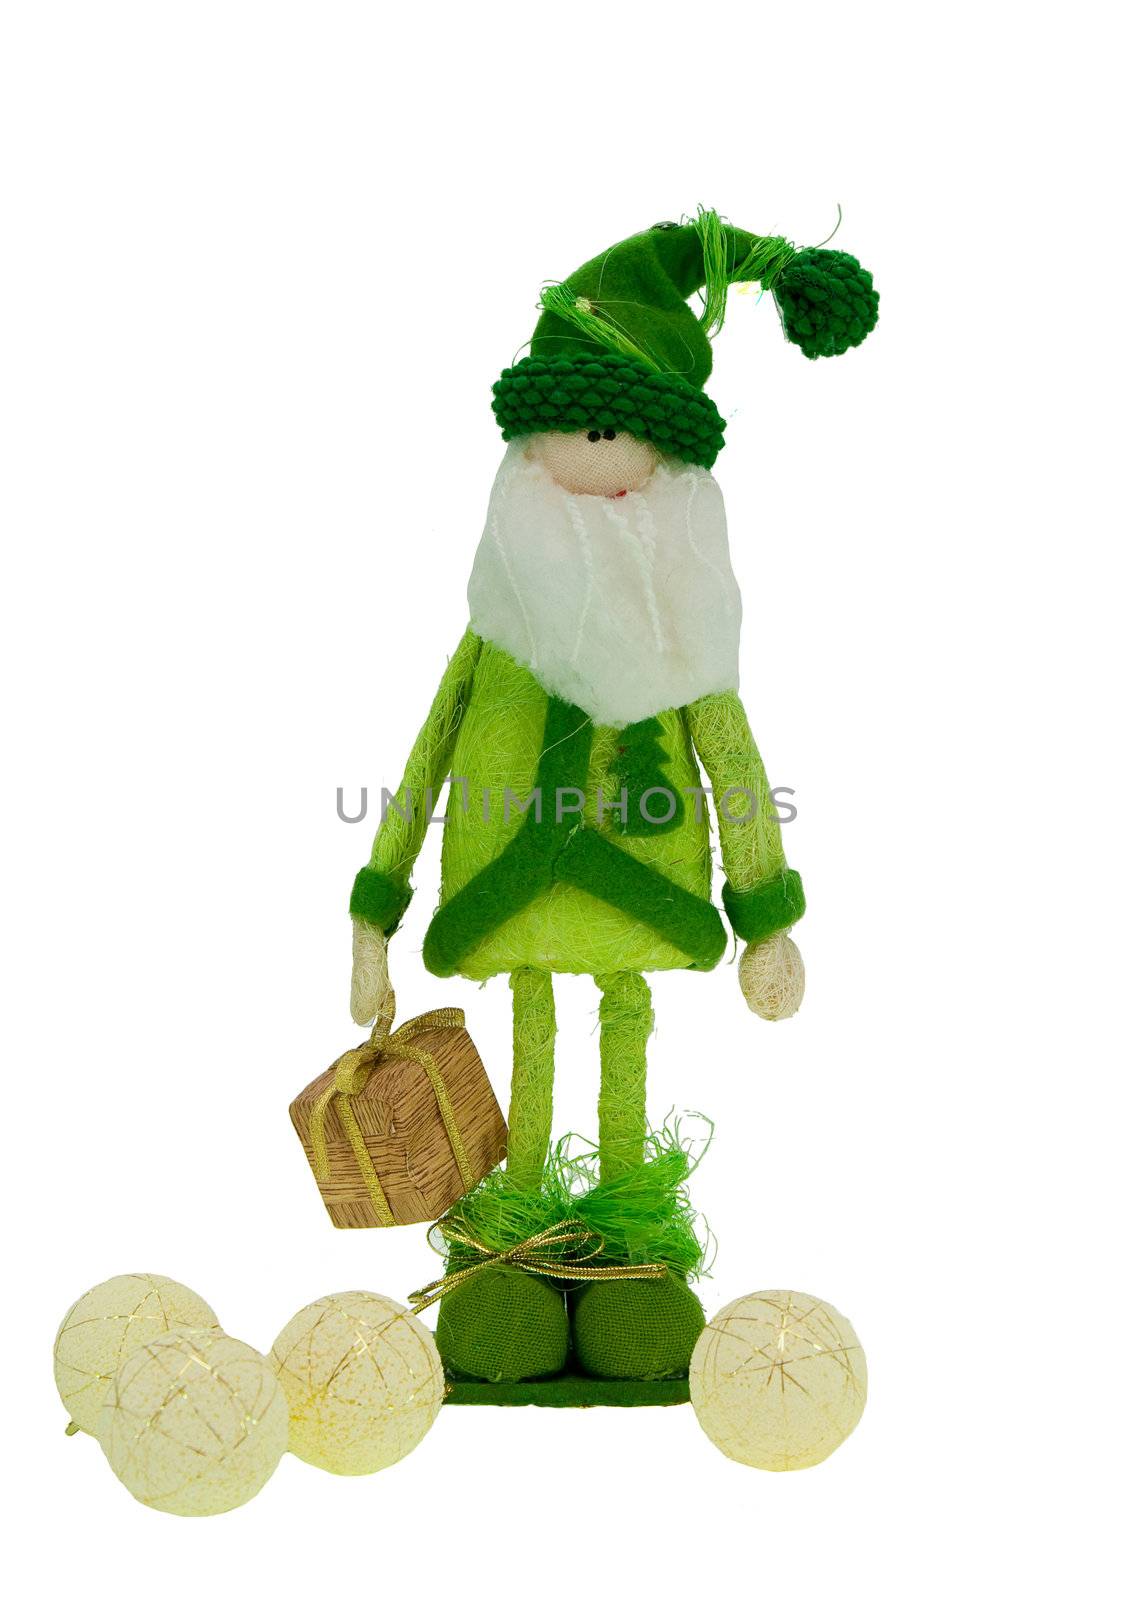 This is a picture of green santa